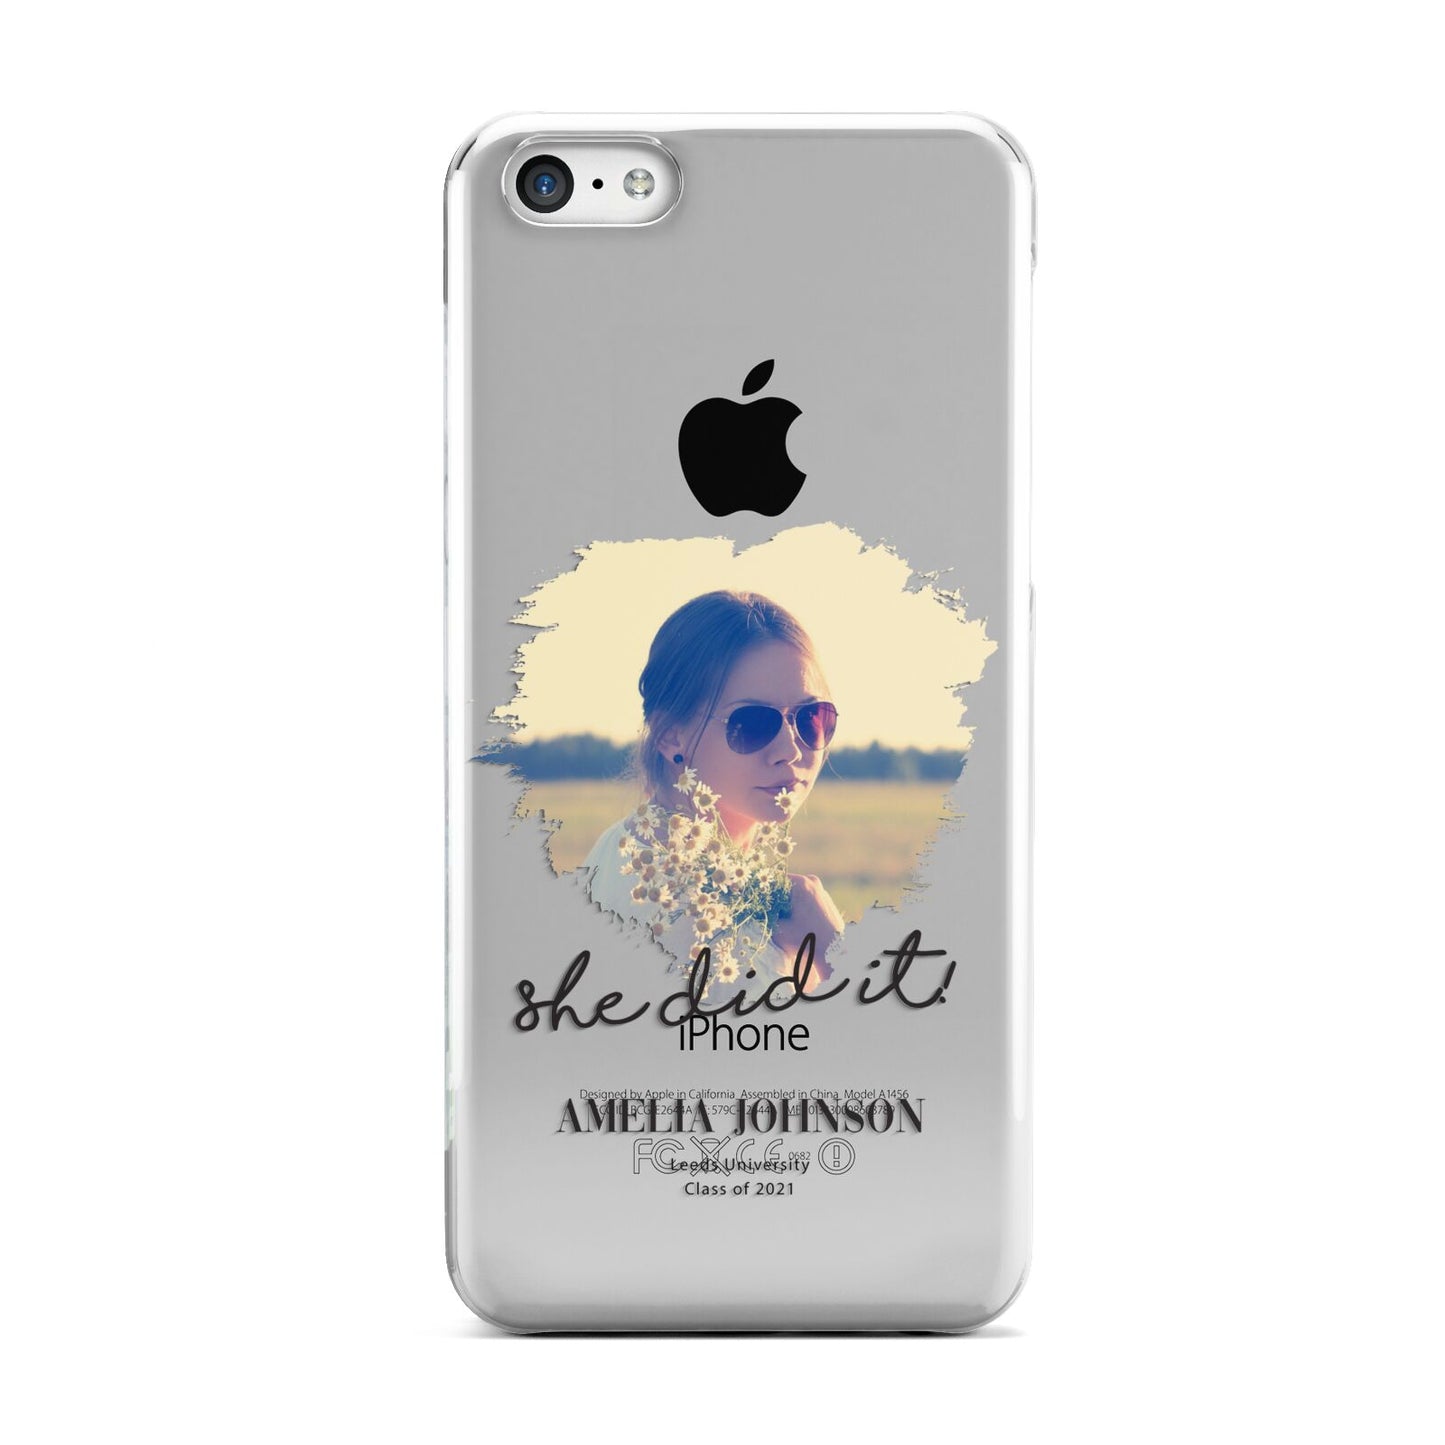 She Did It Graduation Photo with Name Apple iPhone 5c Case